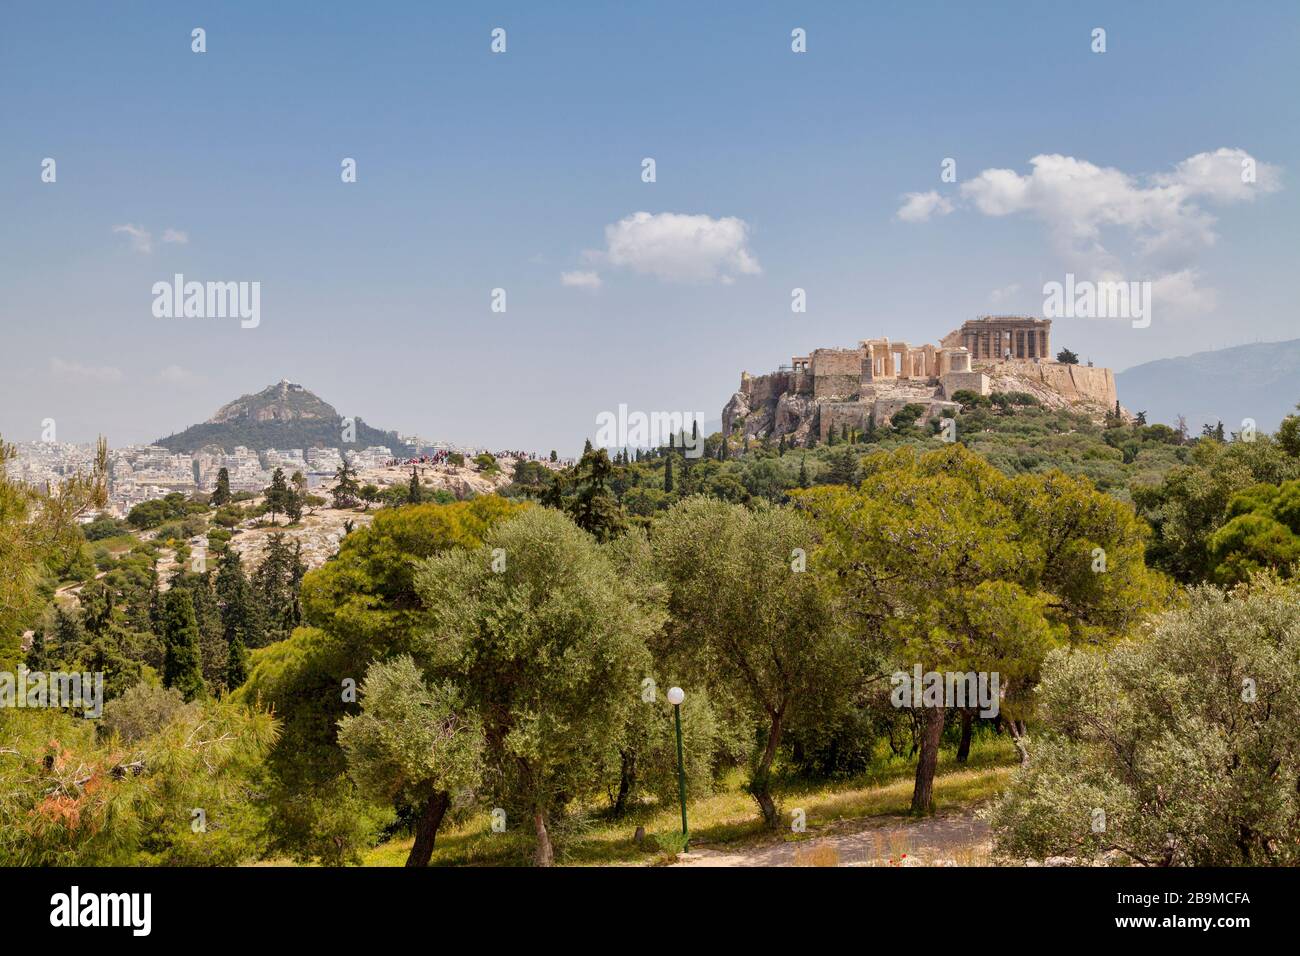 The Acropolis of Athens and the Church of St George on top of Mount Lycabettus. Stock Photo